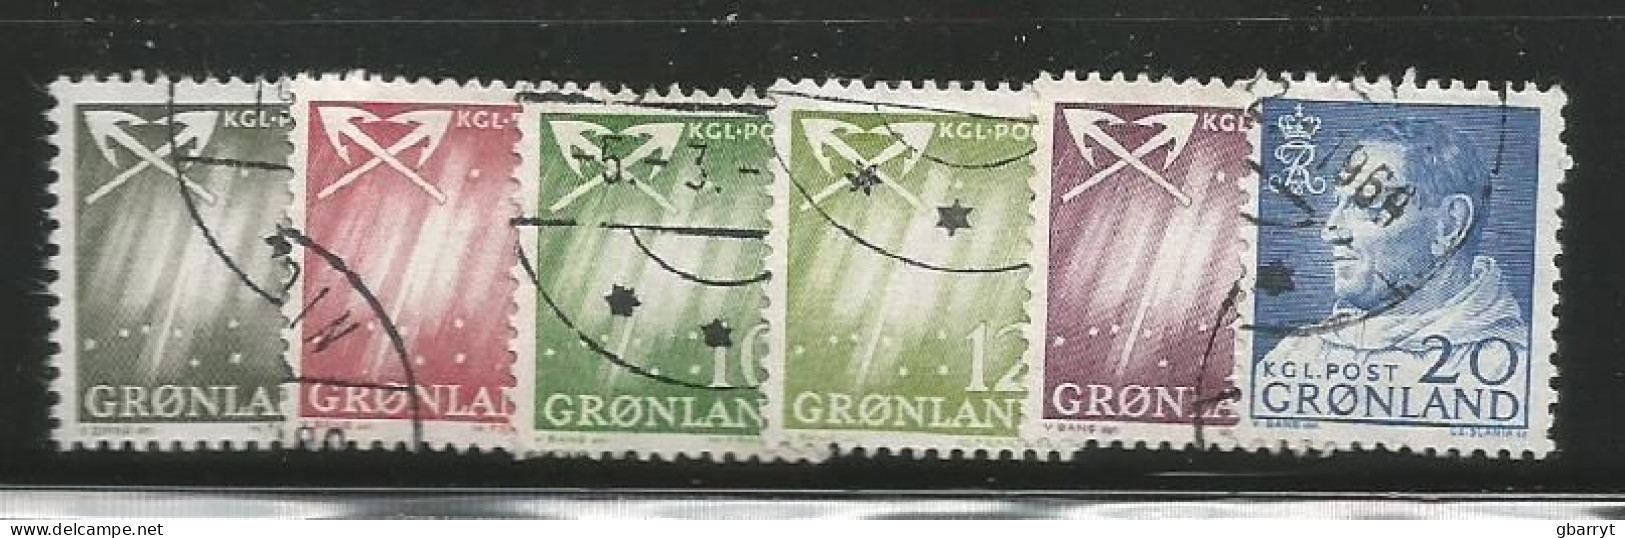 Greenland Scott # 48 - 65 Used VF.complete.......................................w64 - Used Stamps